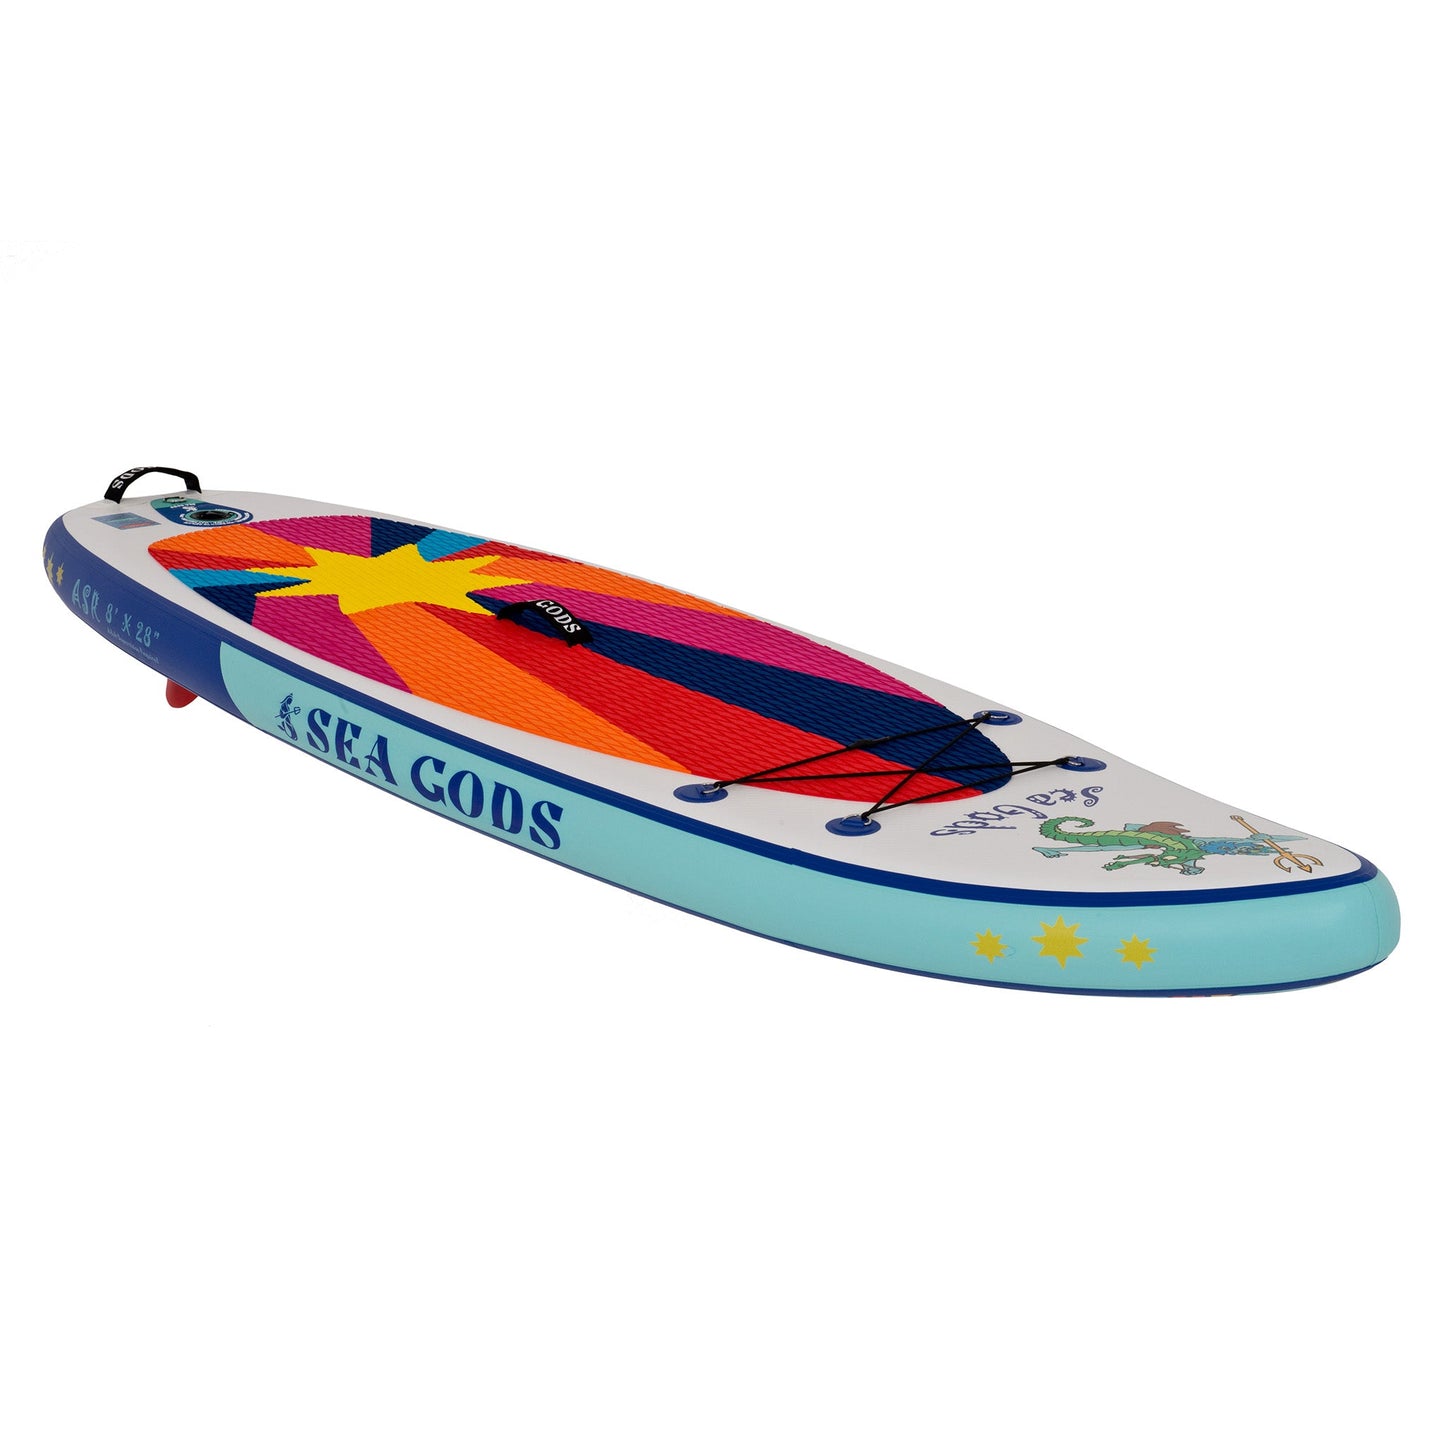 kids paddle board by Sea Gods - full top view